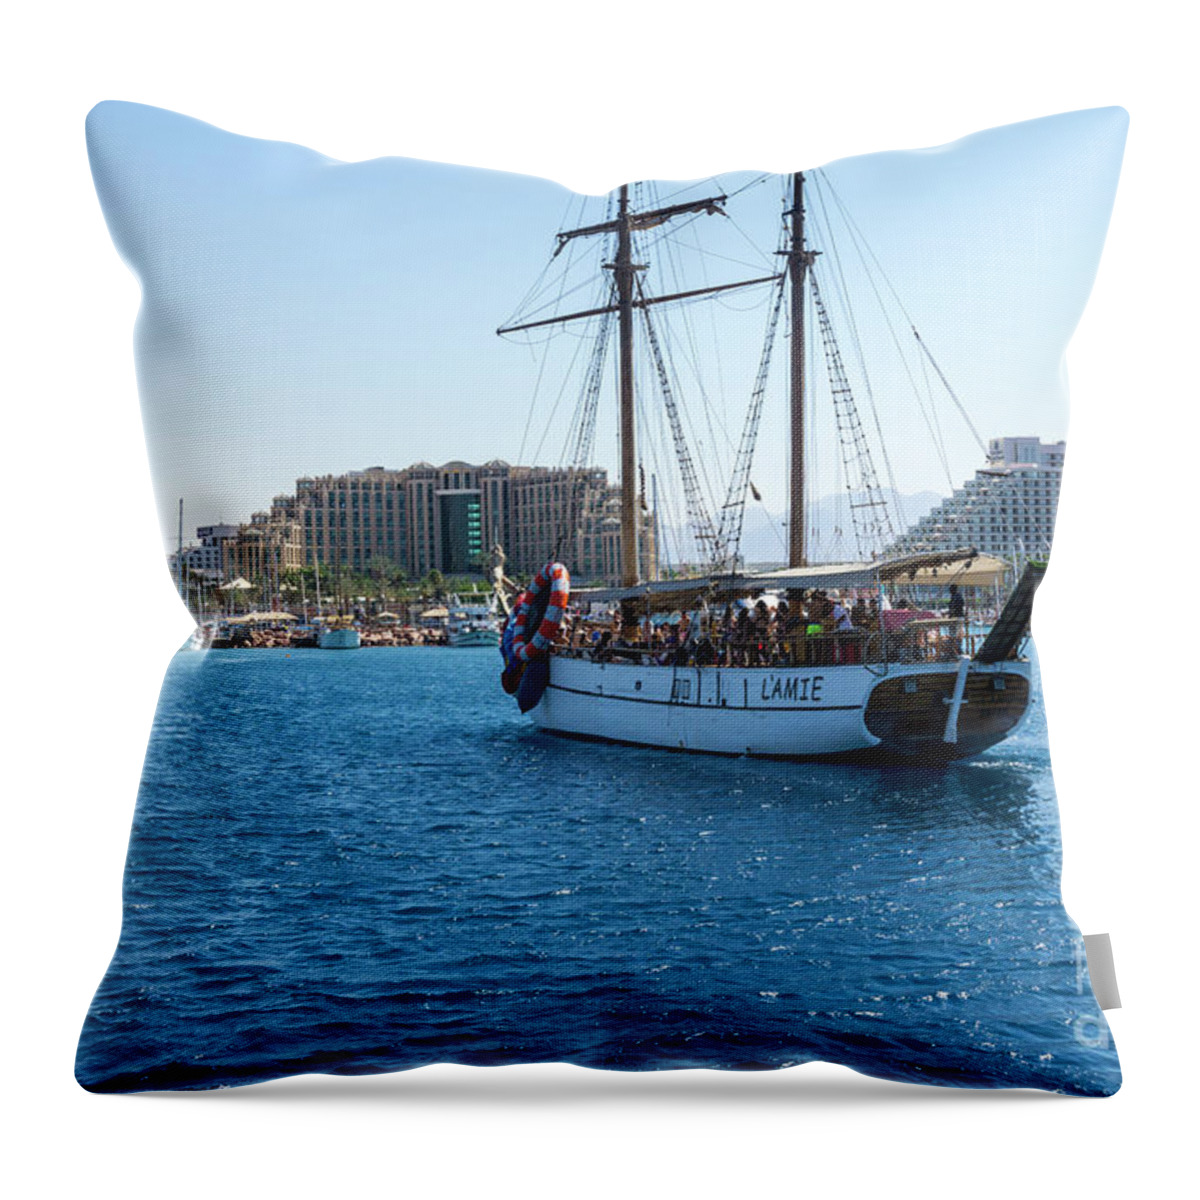 Gulf Of Aqaba Throw Pillow featuring the photograph The excursion boat L'Amie cruises in the Gulf of Aqaba off the r by William Kuta